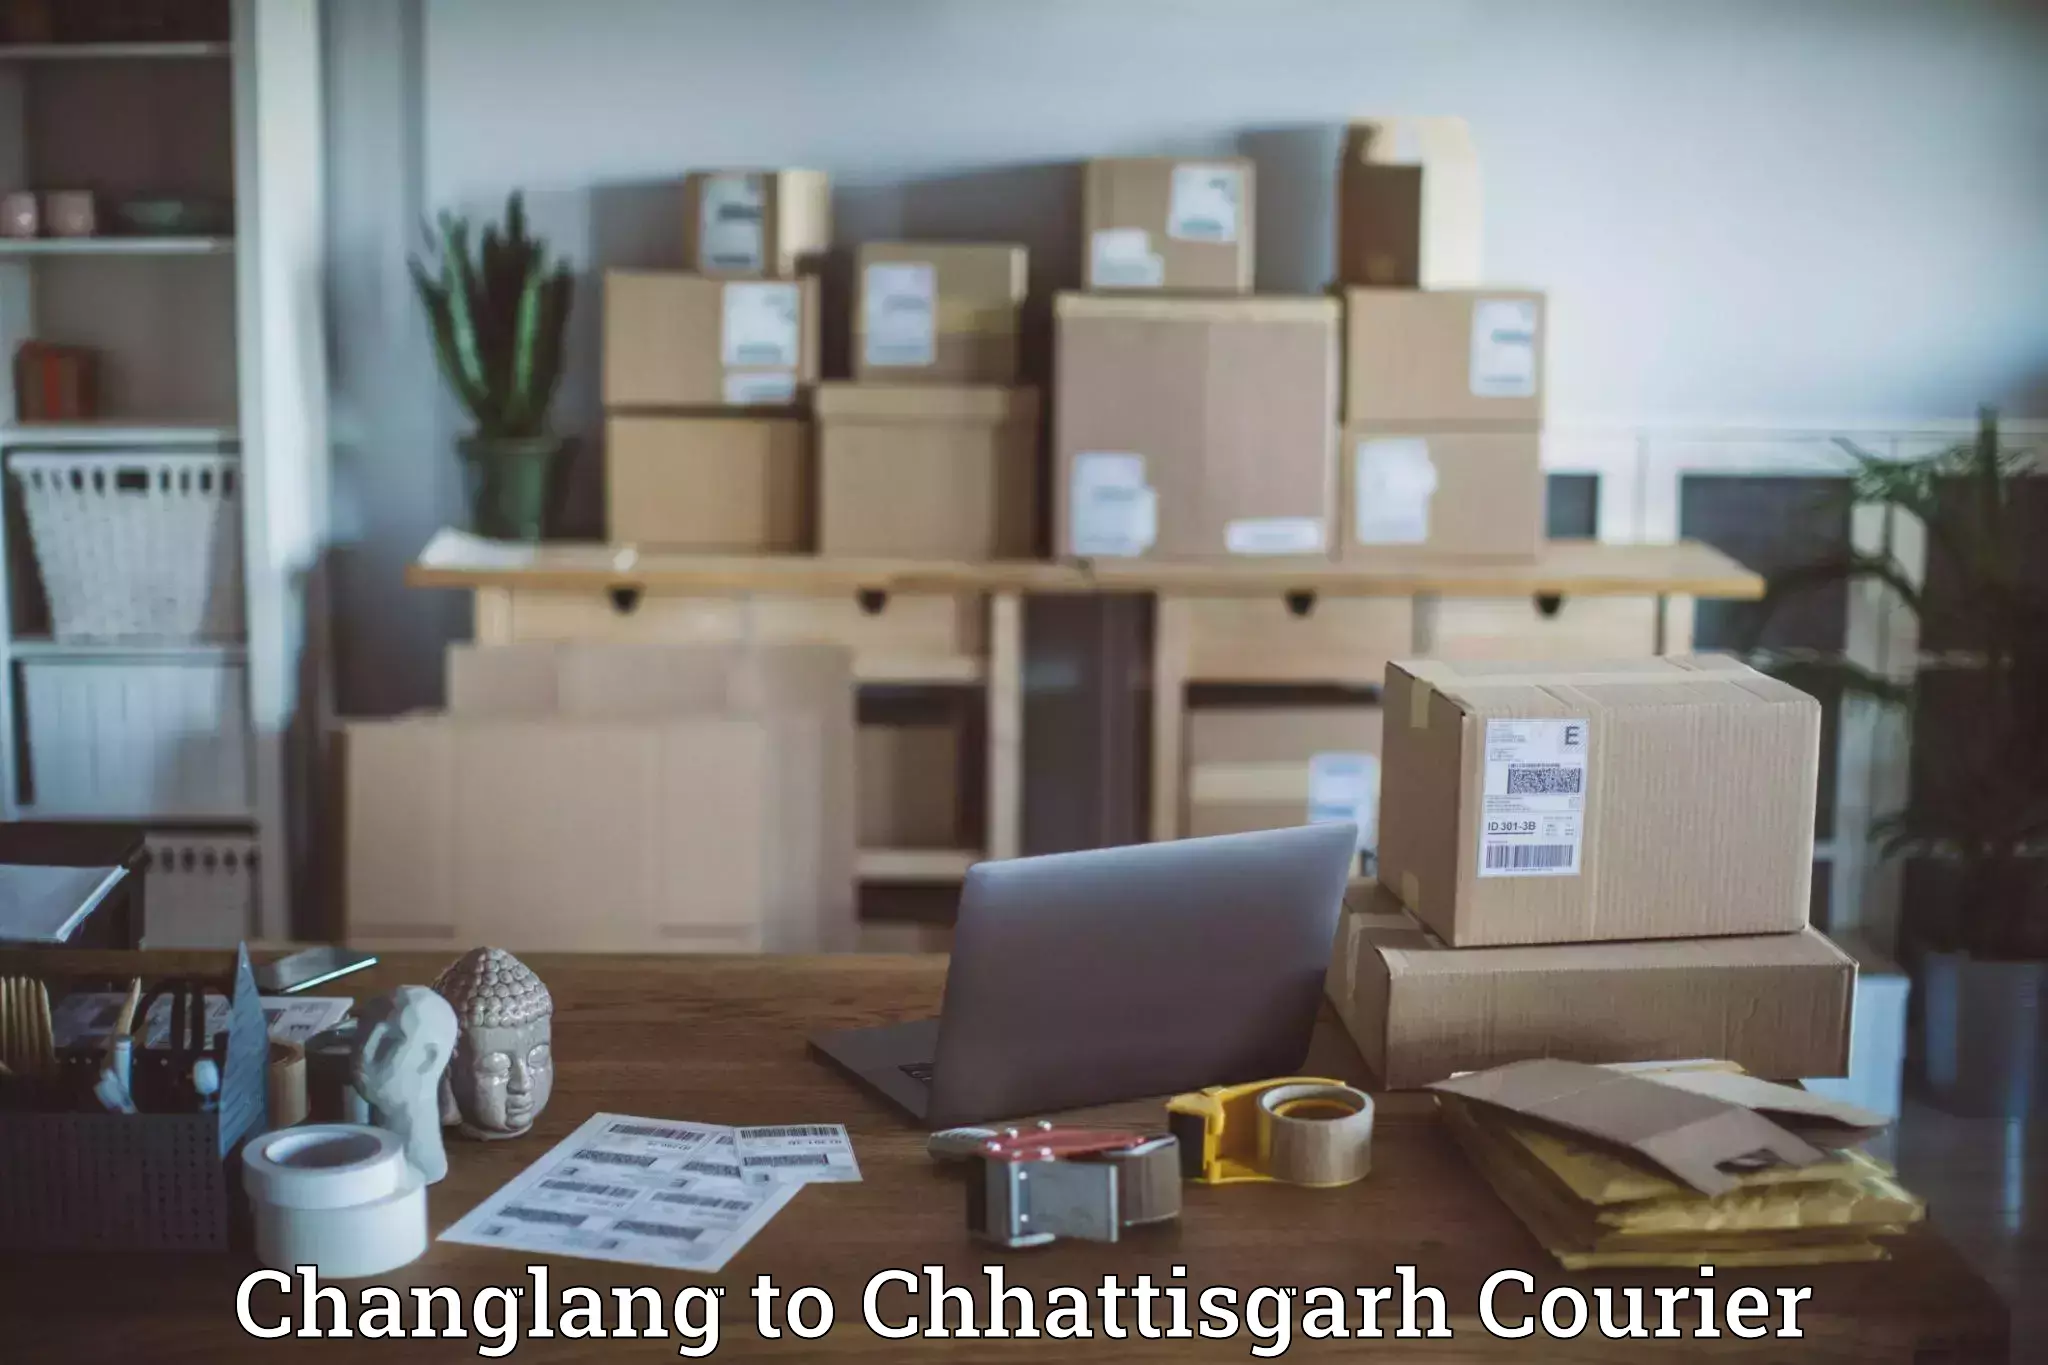 Fast delivery service Changlang to Chhattisgarh